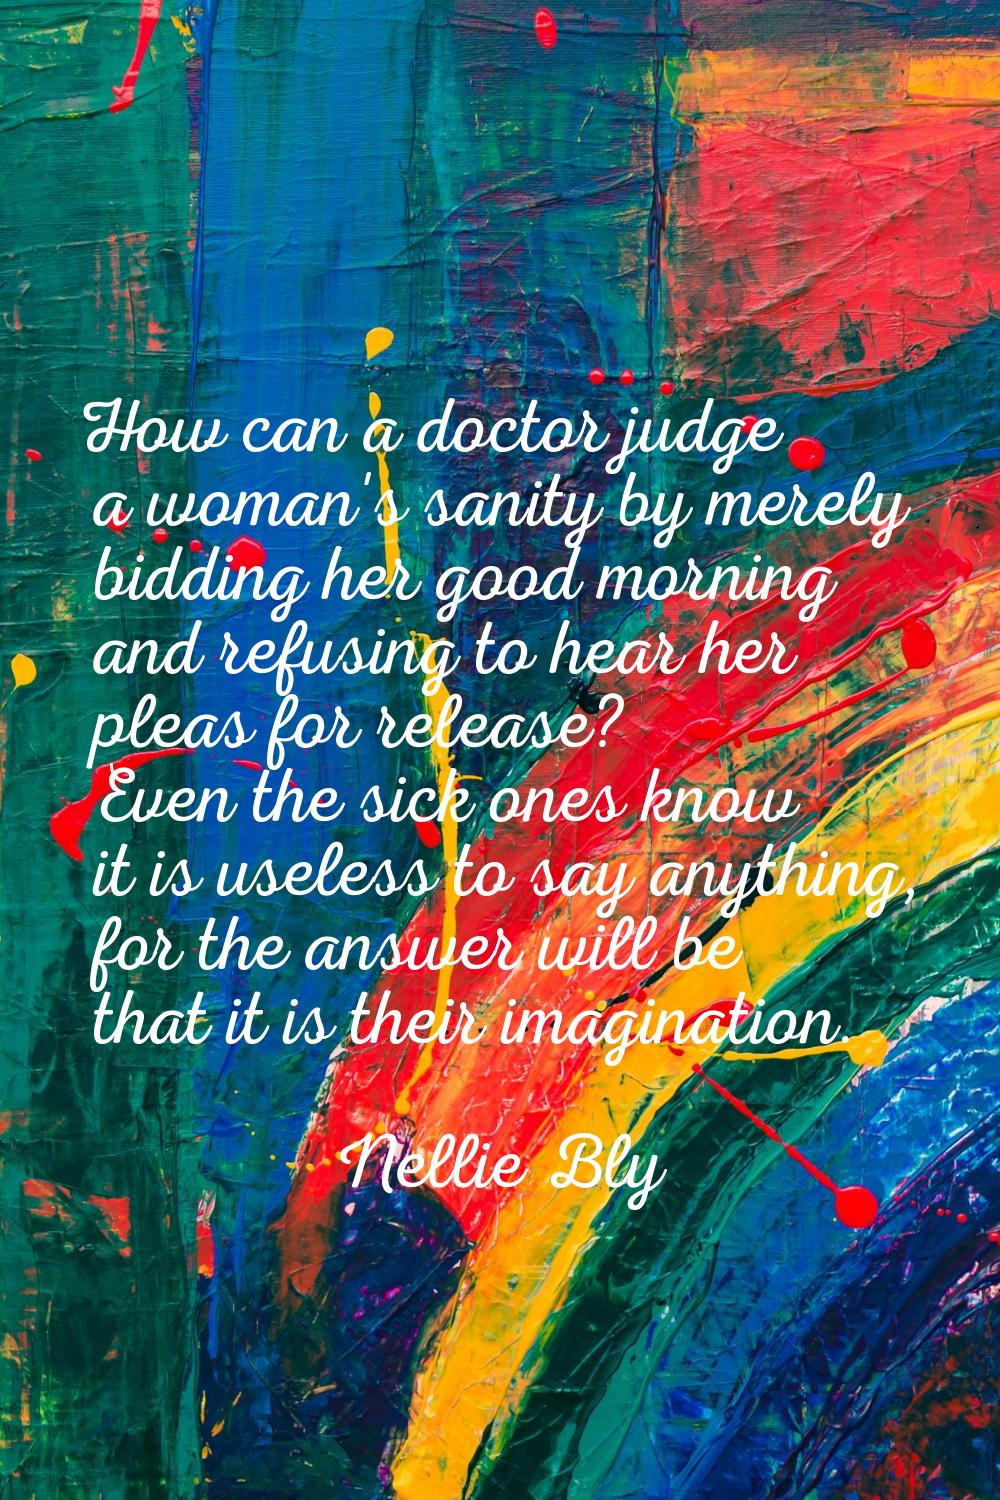 How can a doctor judge a woman's sanity by merely bidding her good morning and refusing to hear her